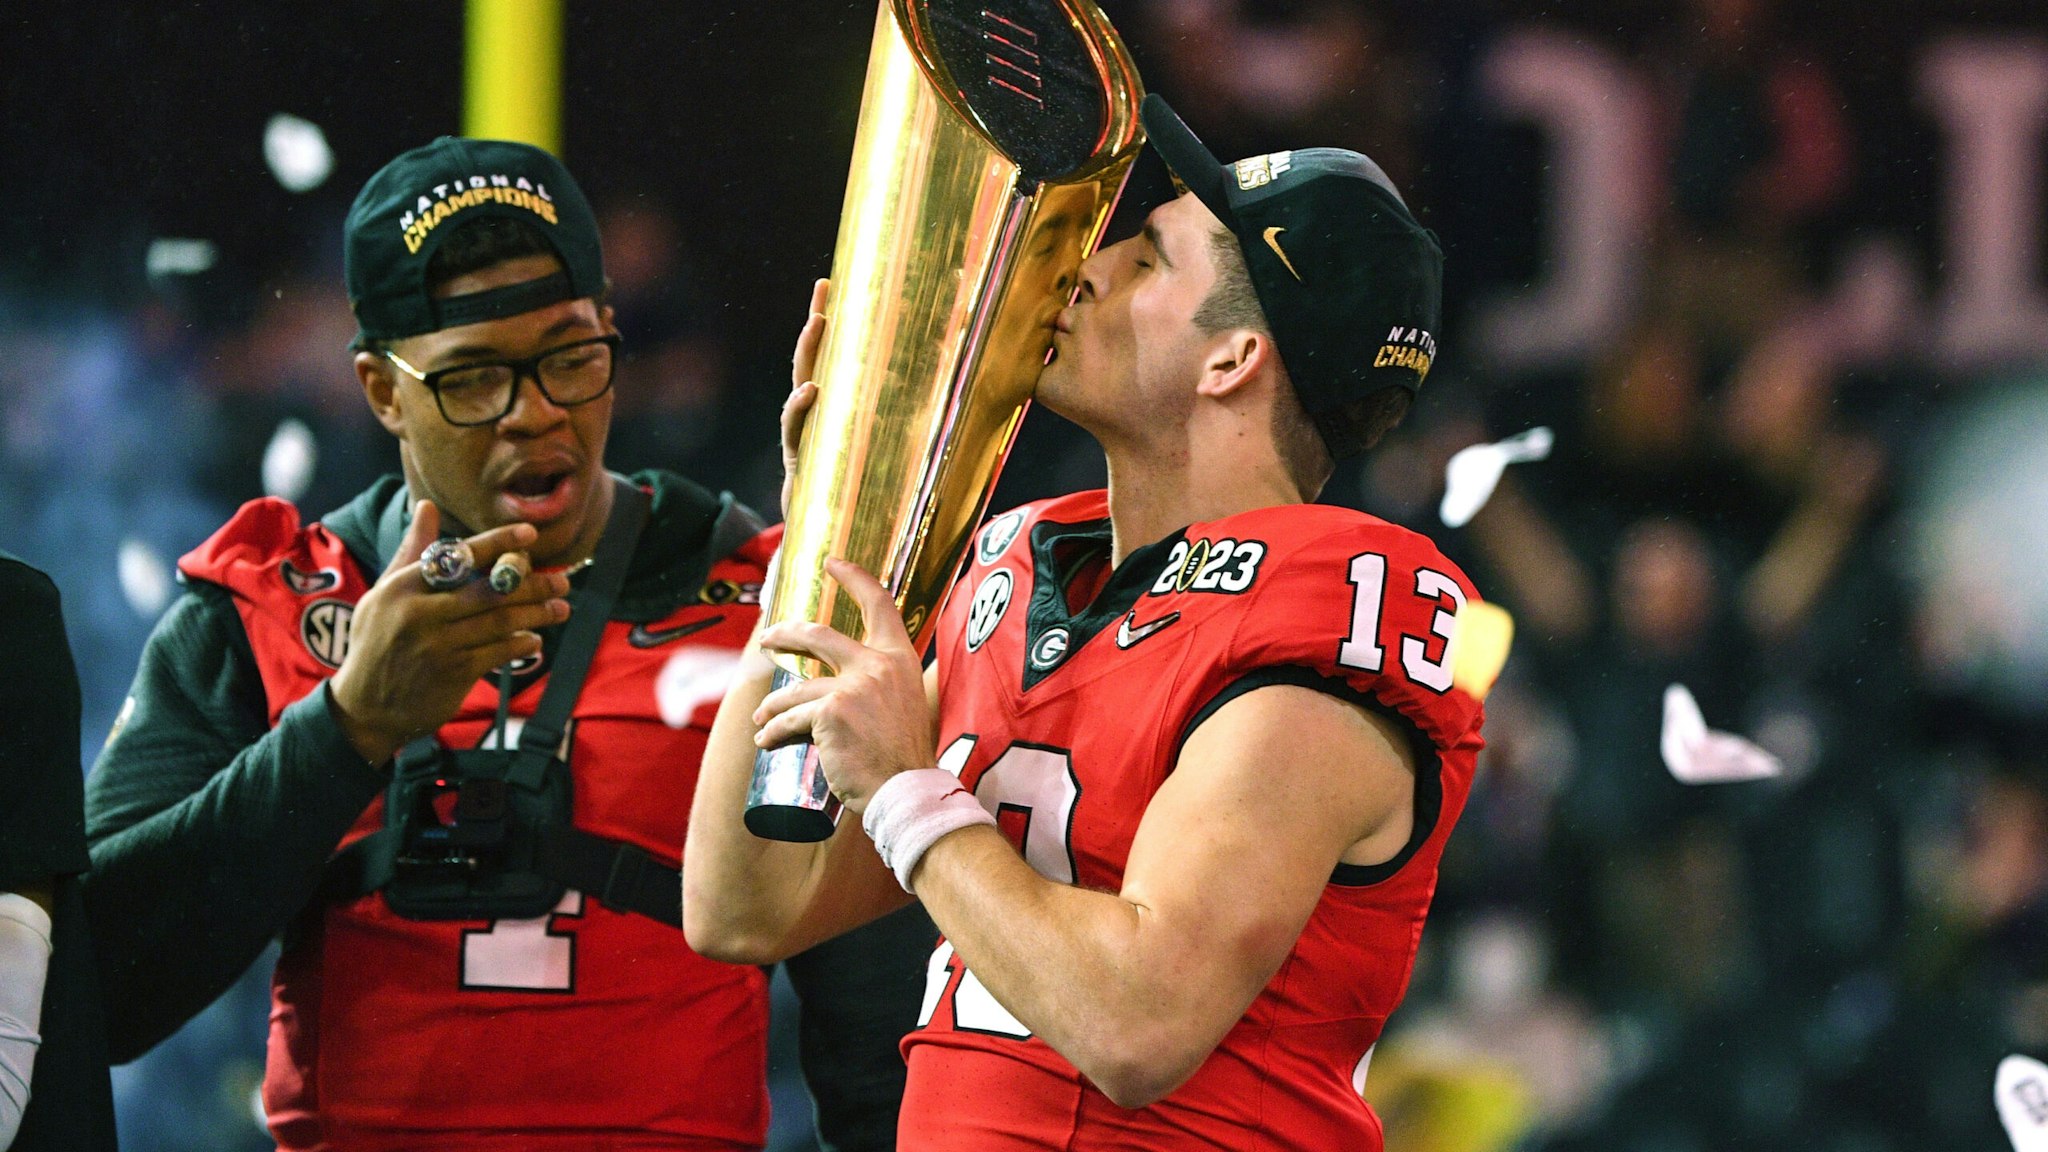 INGLEWOOD, CA - JANUARY 09: Georgia Bulldogs quarterback Stetson Bennett (13) kisses the championship trophy after the Georgia Bulldogs defeated the TCU Horned Frogs in the College Football Playoff National Championship game on January 9, 2023, at SoFi Stadium in Inglewood, CA.